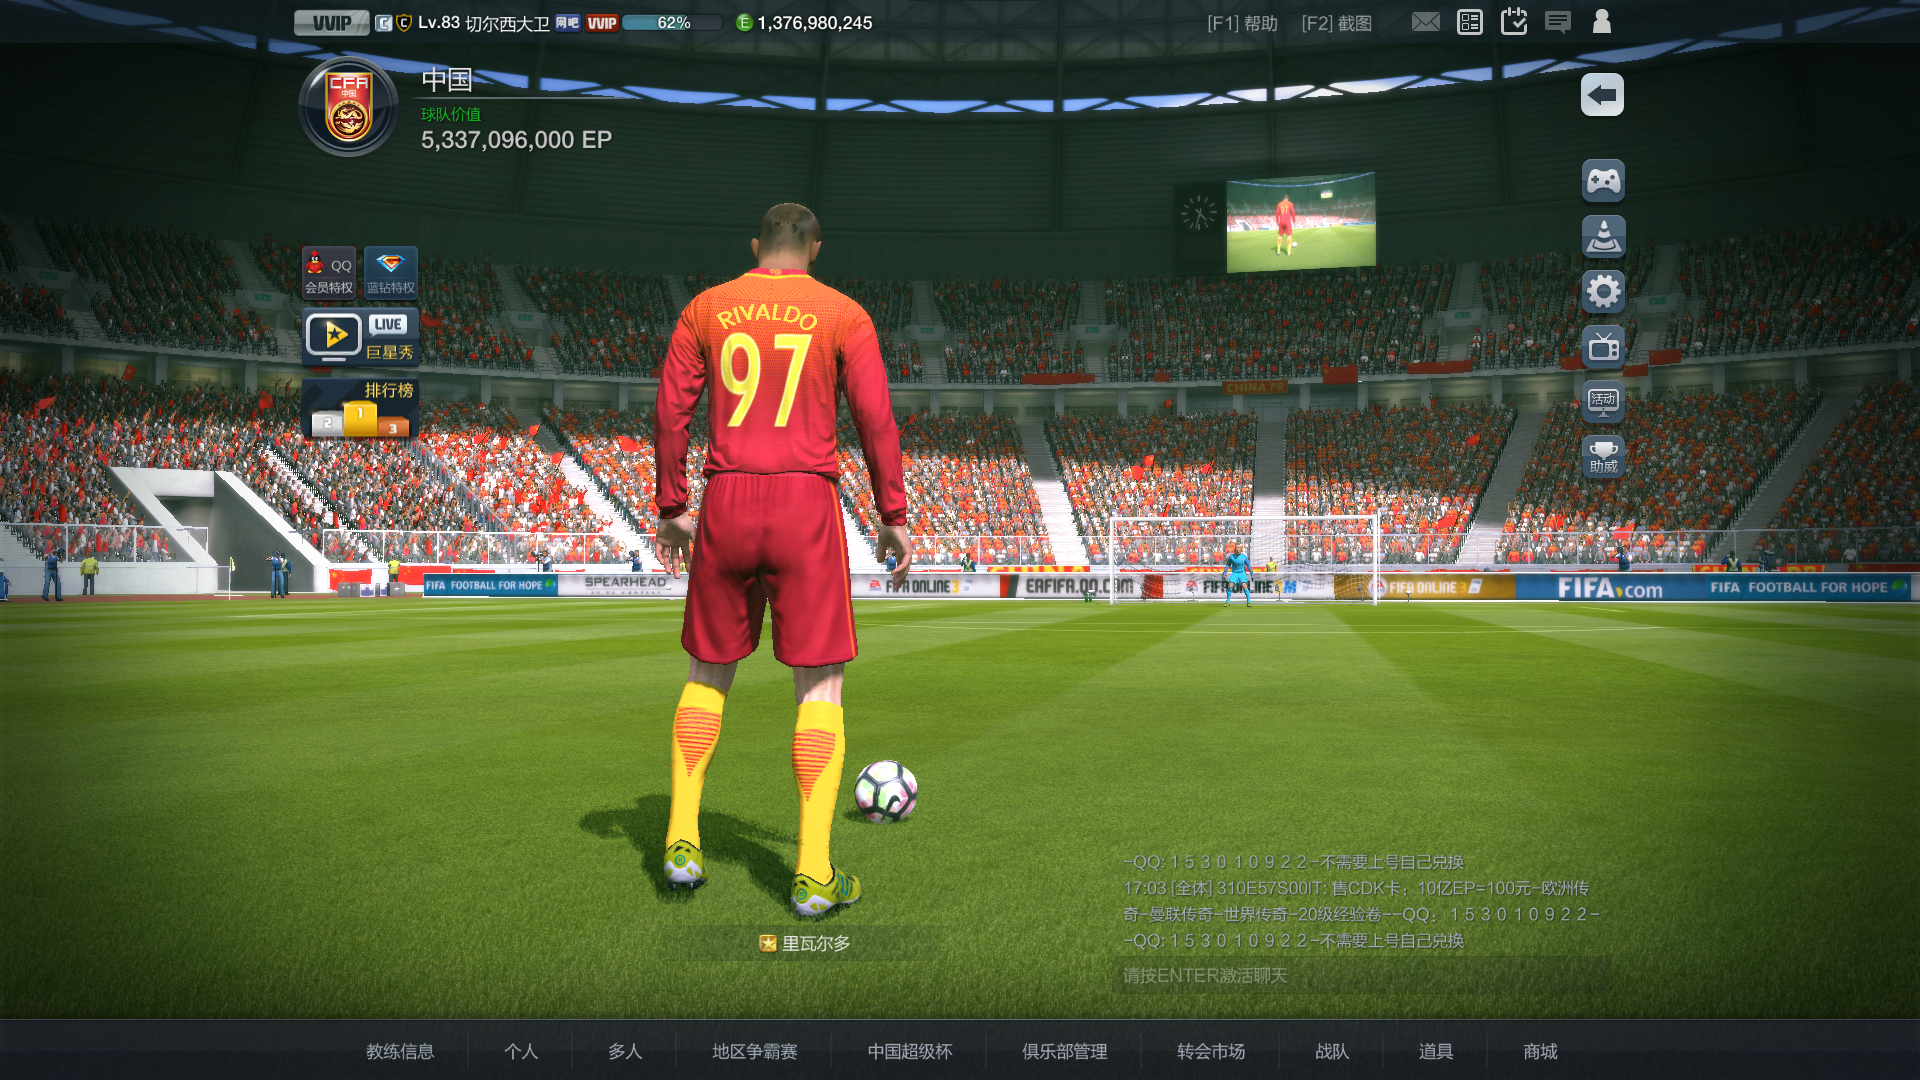 fifa online 3 download free